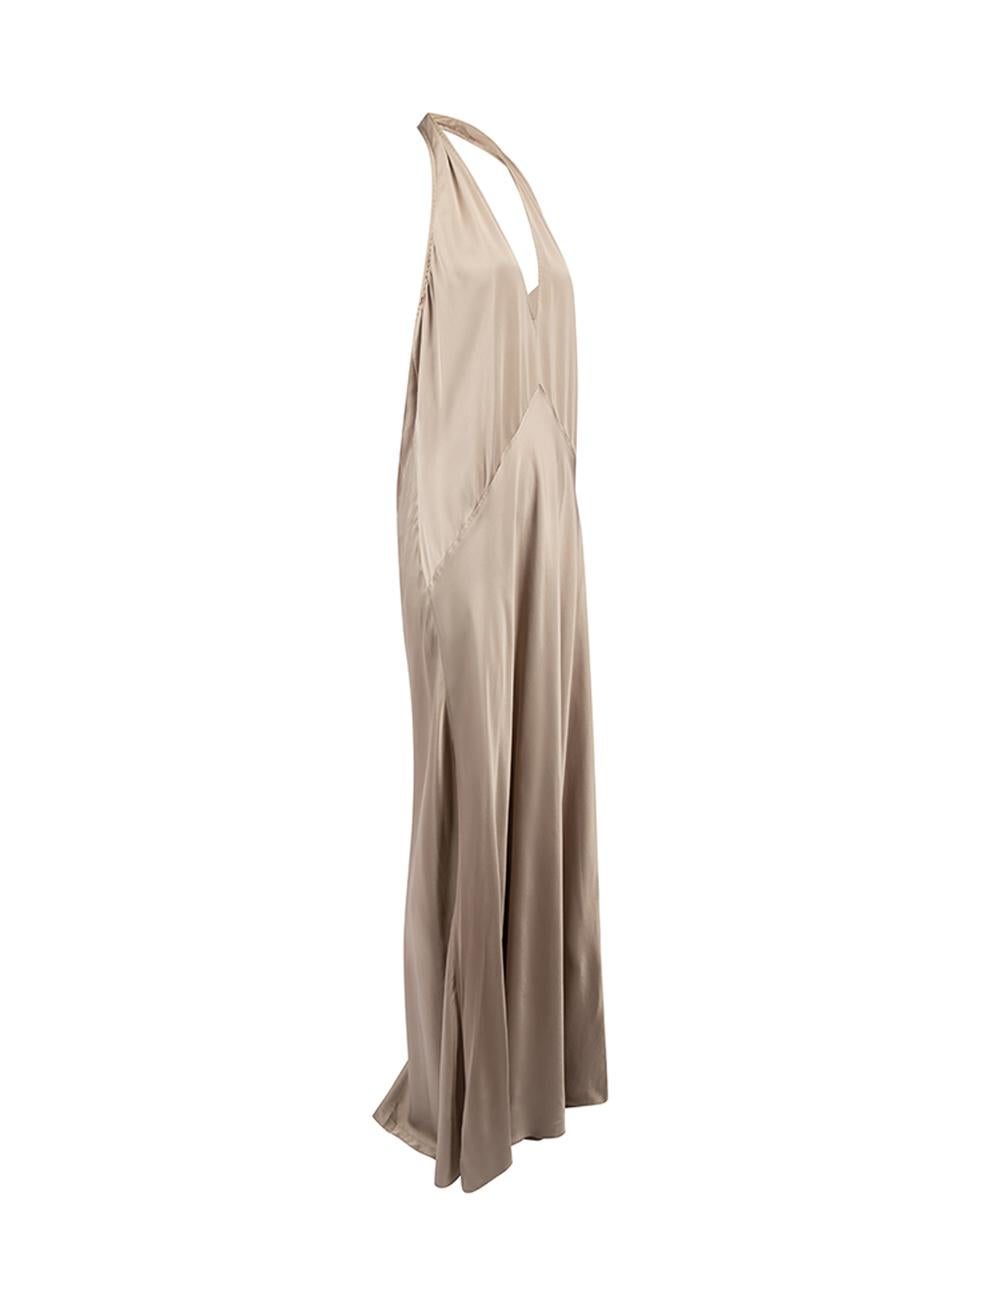 CONDITION is Very good. Minimal wear to dress is evident. Minimal wear to the outer satin fabric where a small stain can be seen on the front of this used Rochas designer resale item. 
 
 Details
  Beige
 Synthetic
 Maxi dress
 Halter plunge